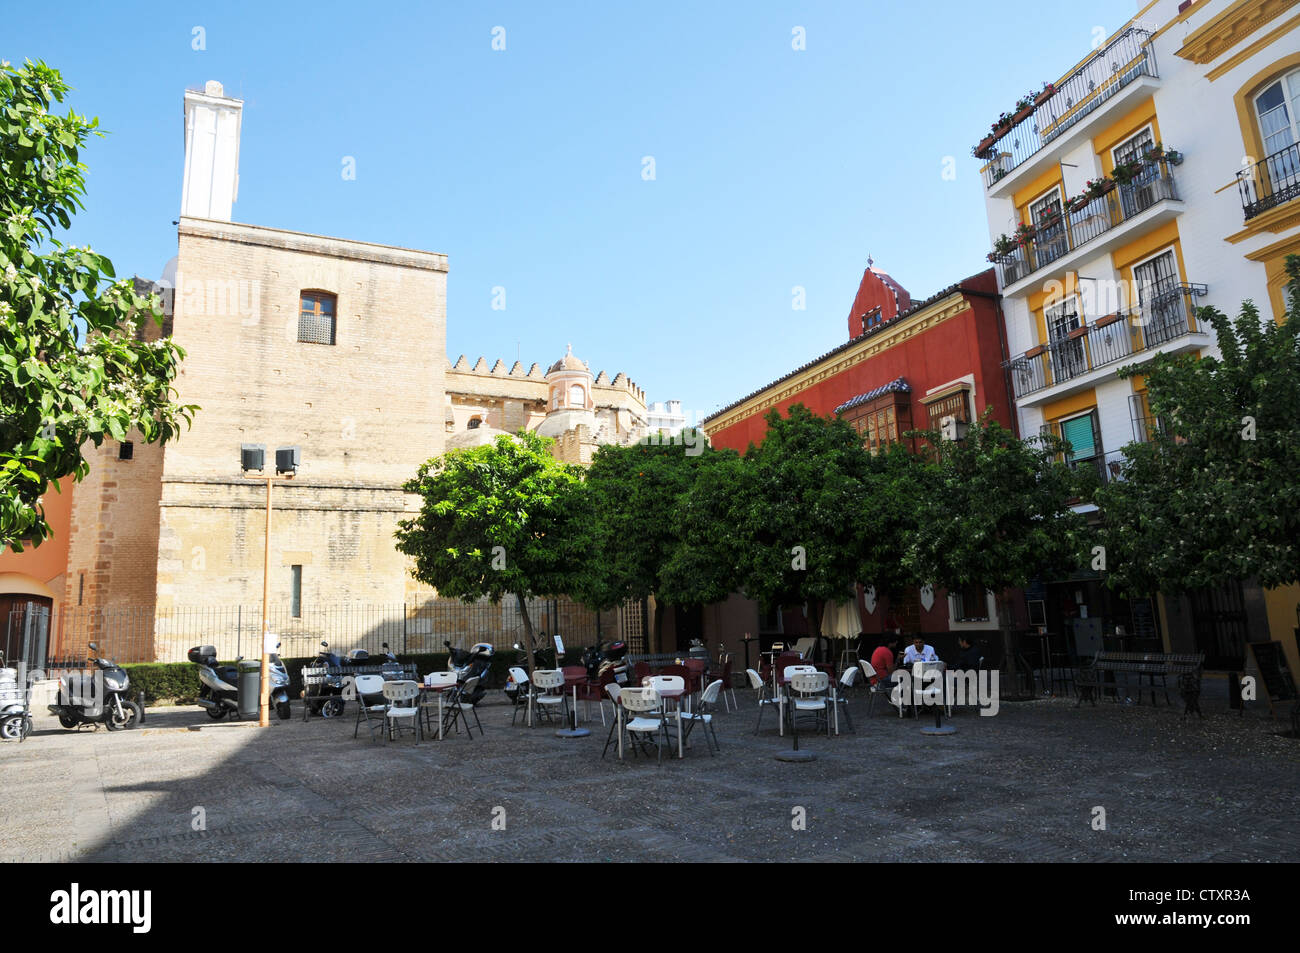 People sitting outside in square, church, classic spanish style houses, center of Seville, Spain. Stock Photo